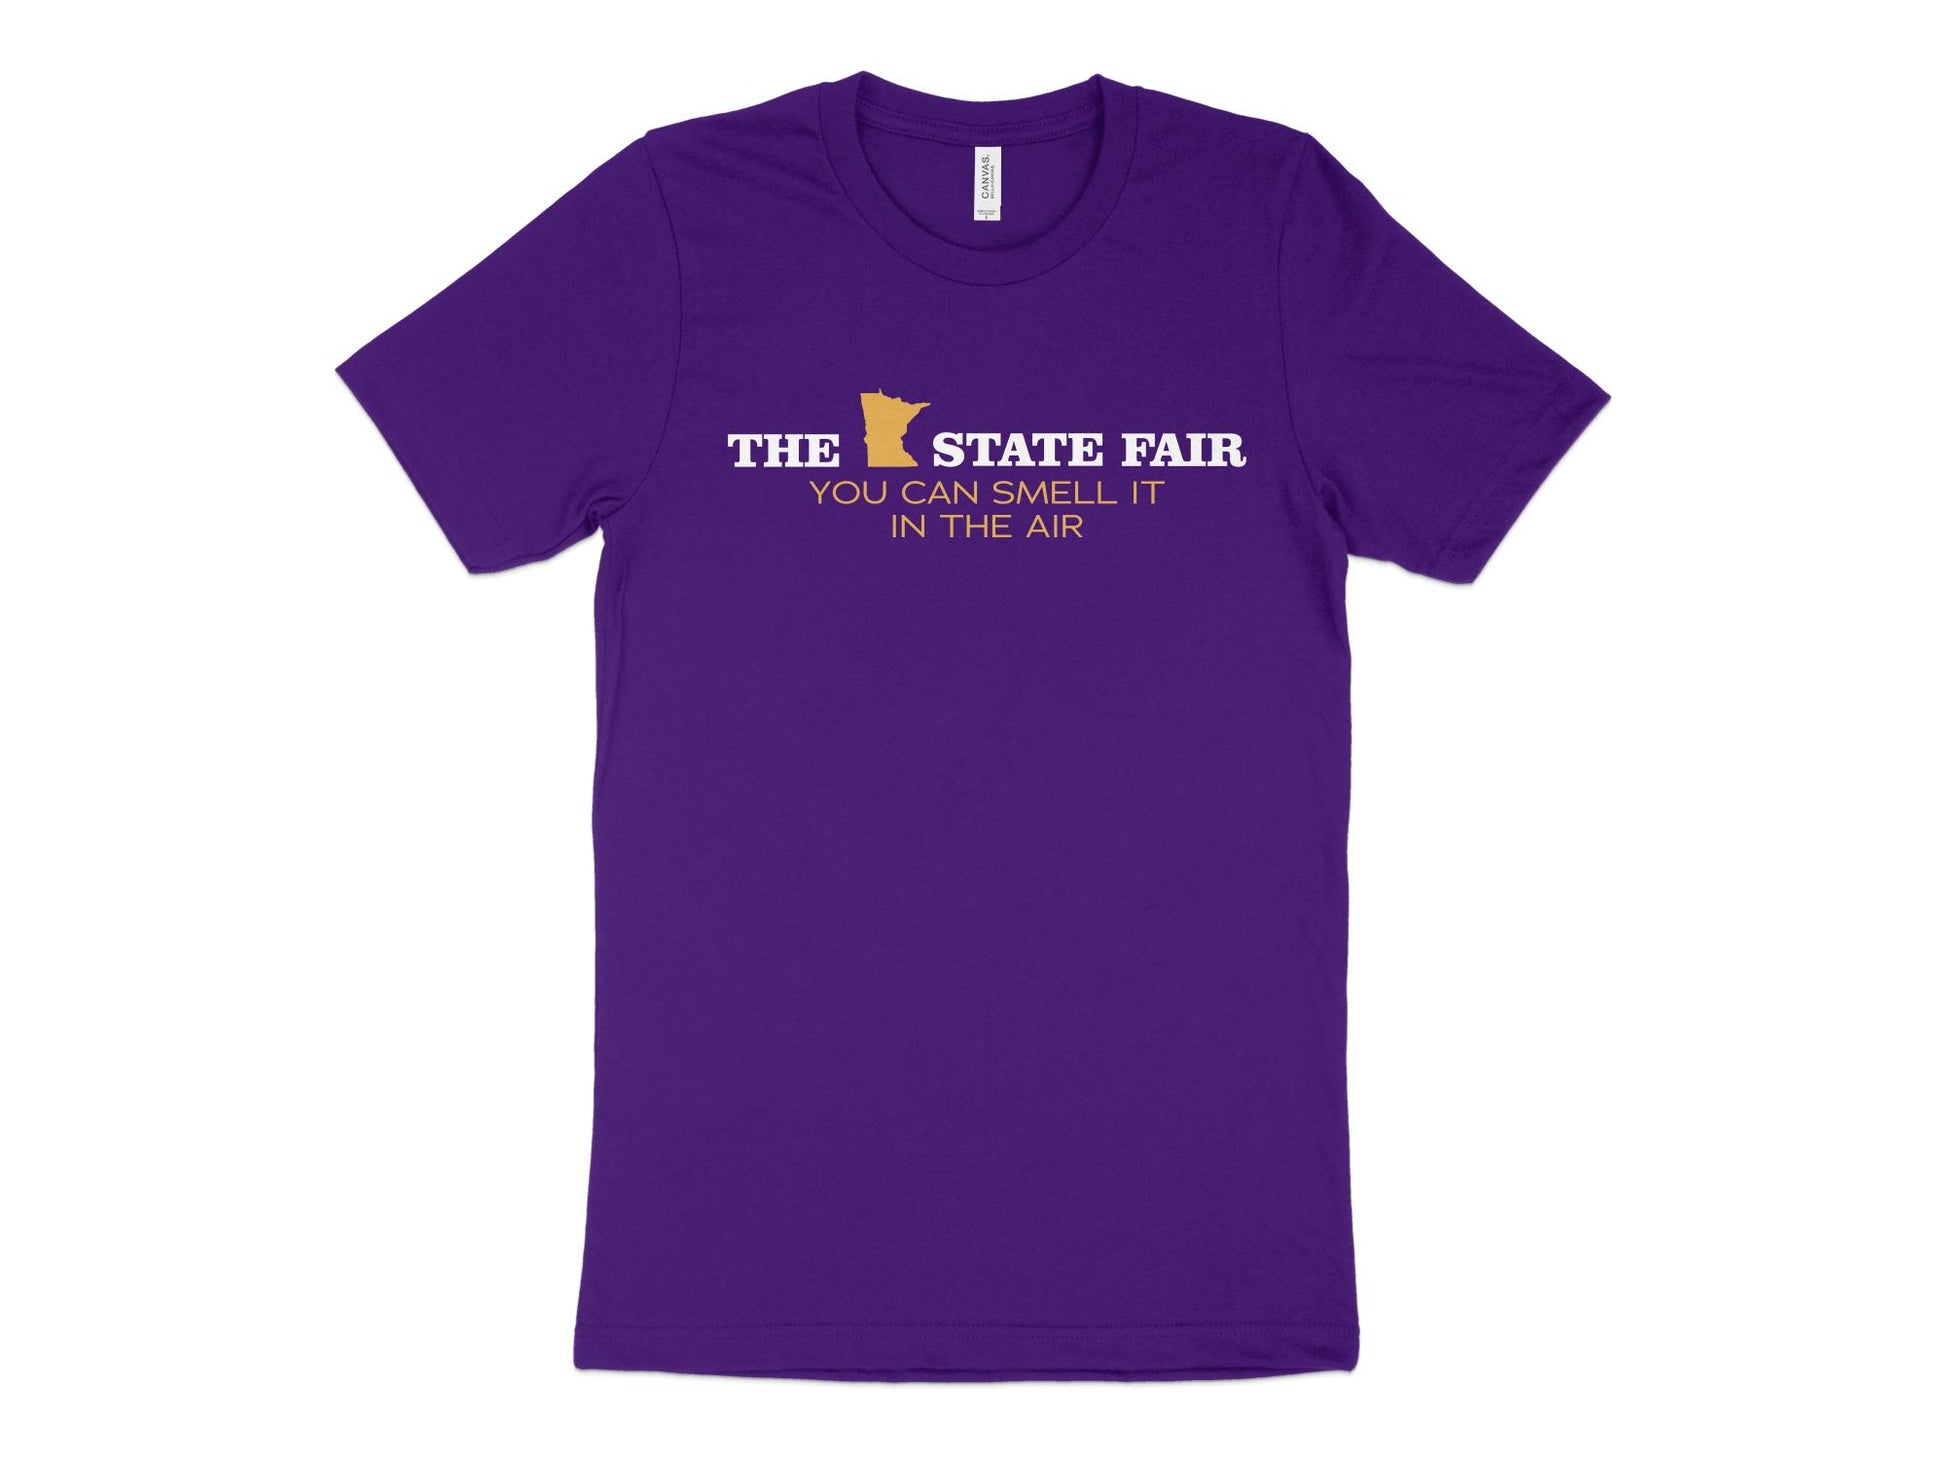 Minnesota State Fair Shirt - You Can Smell It in the Air, purple